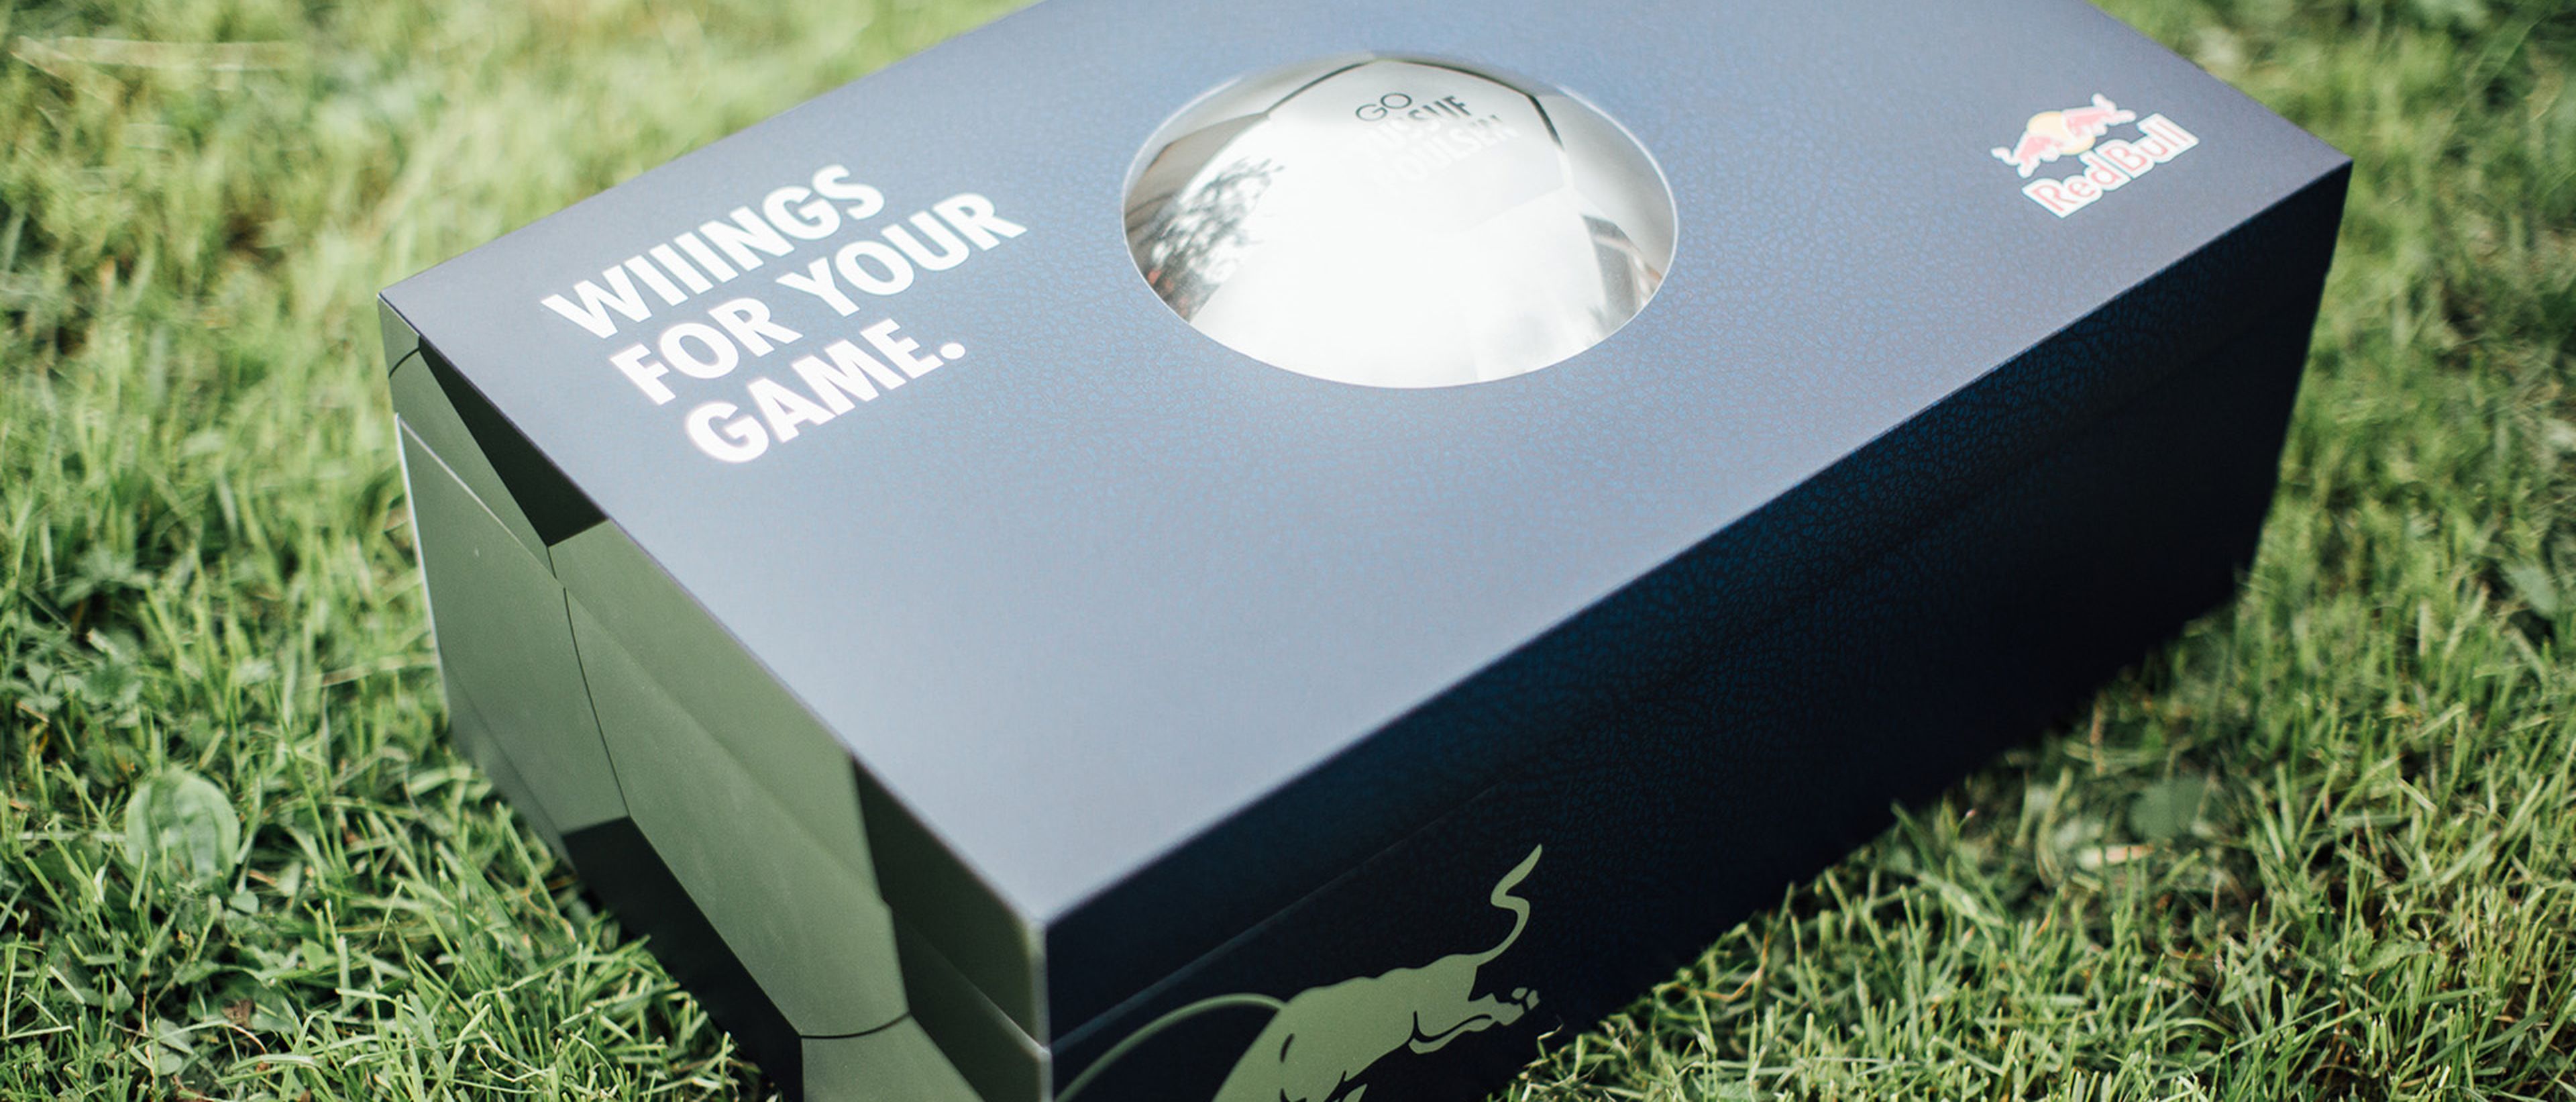 Red Bull Box mit aufschrift "Wiiings for your game"